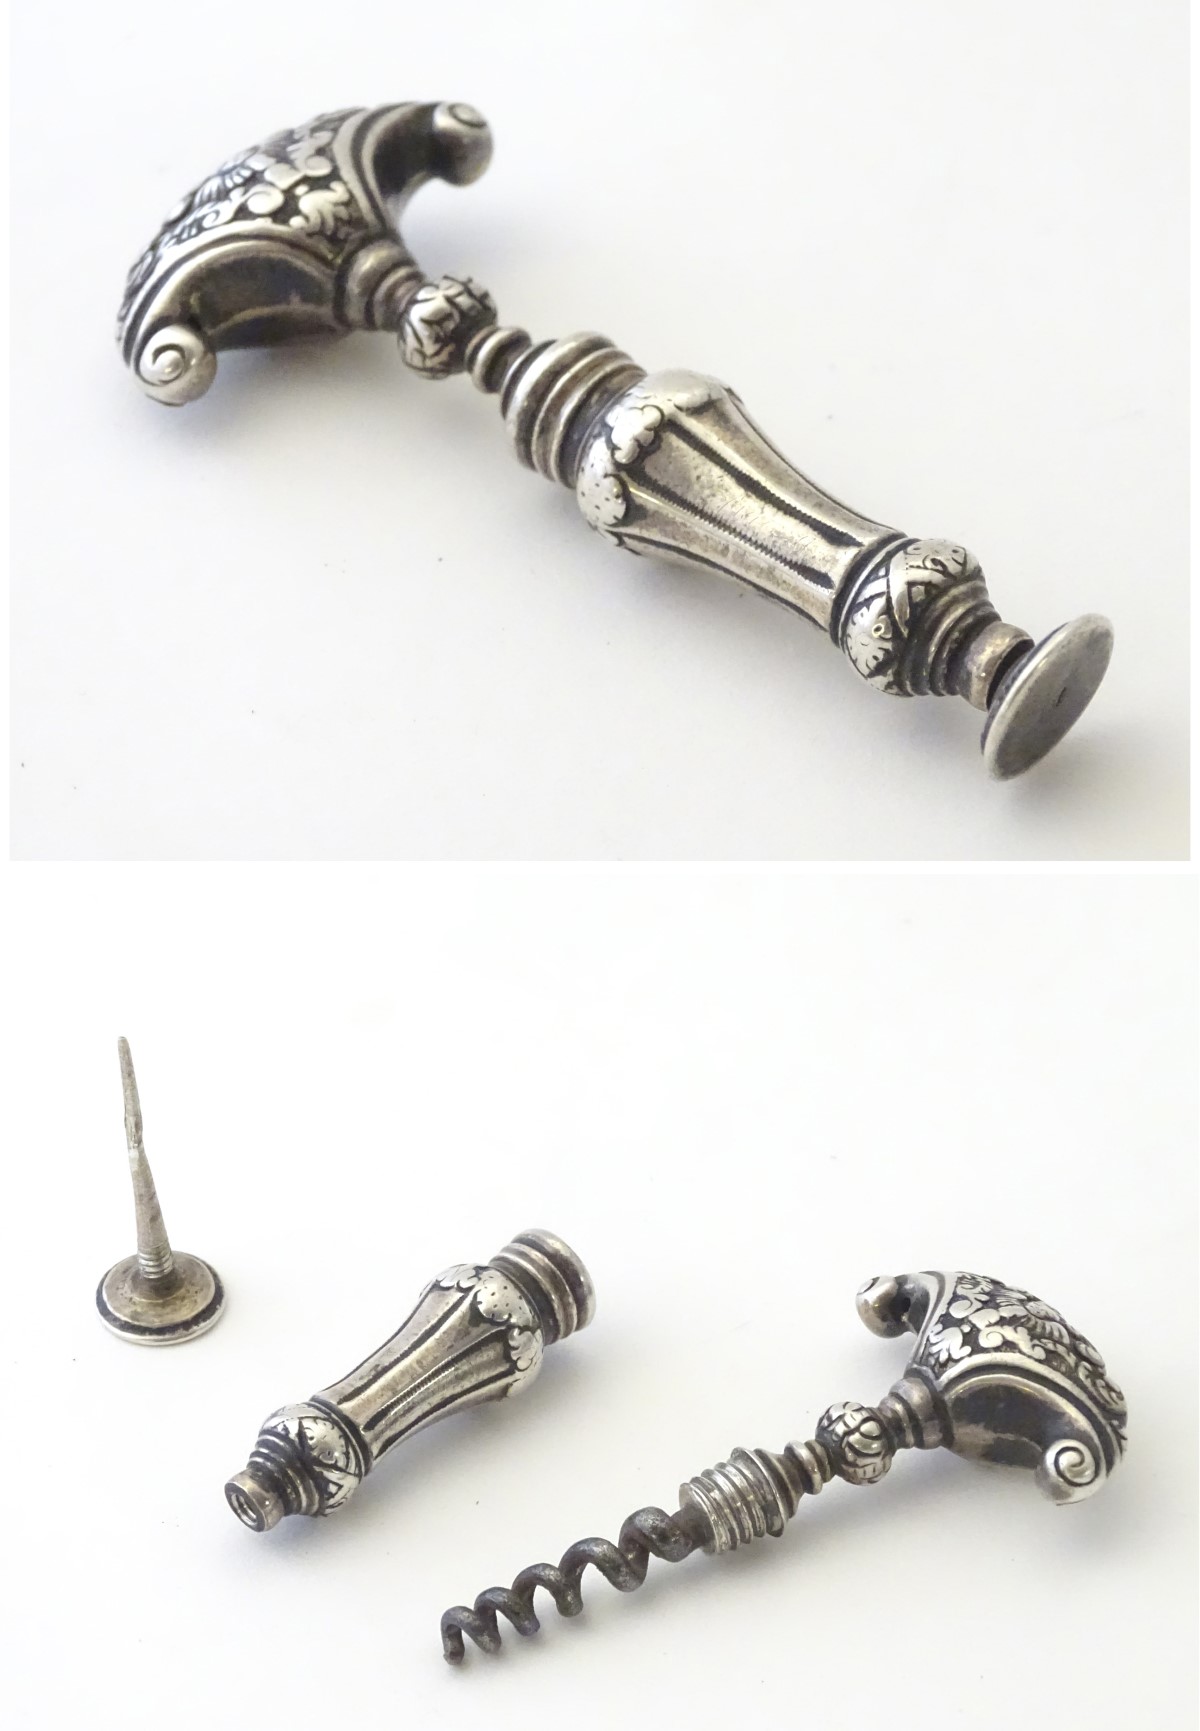 Corkscew : A 18thC Dutch white metal ( silver) corkscrew with shaped handle having acanthus